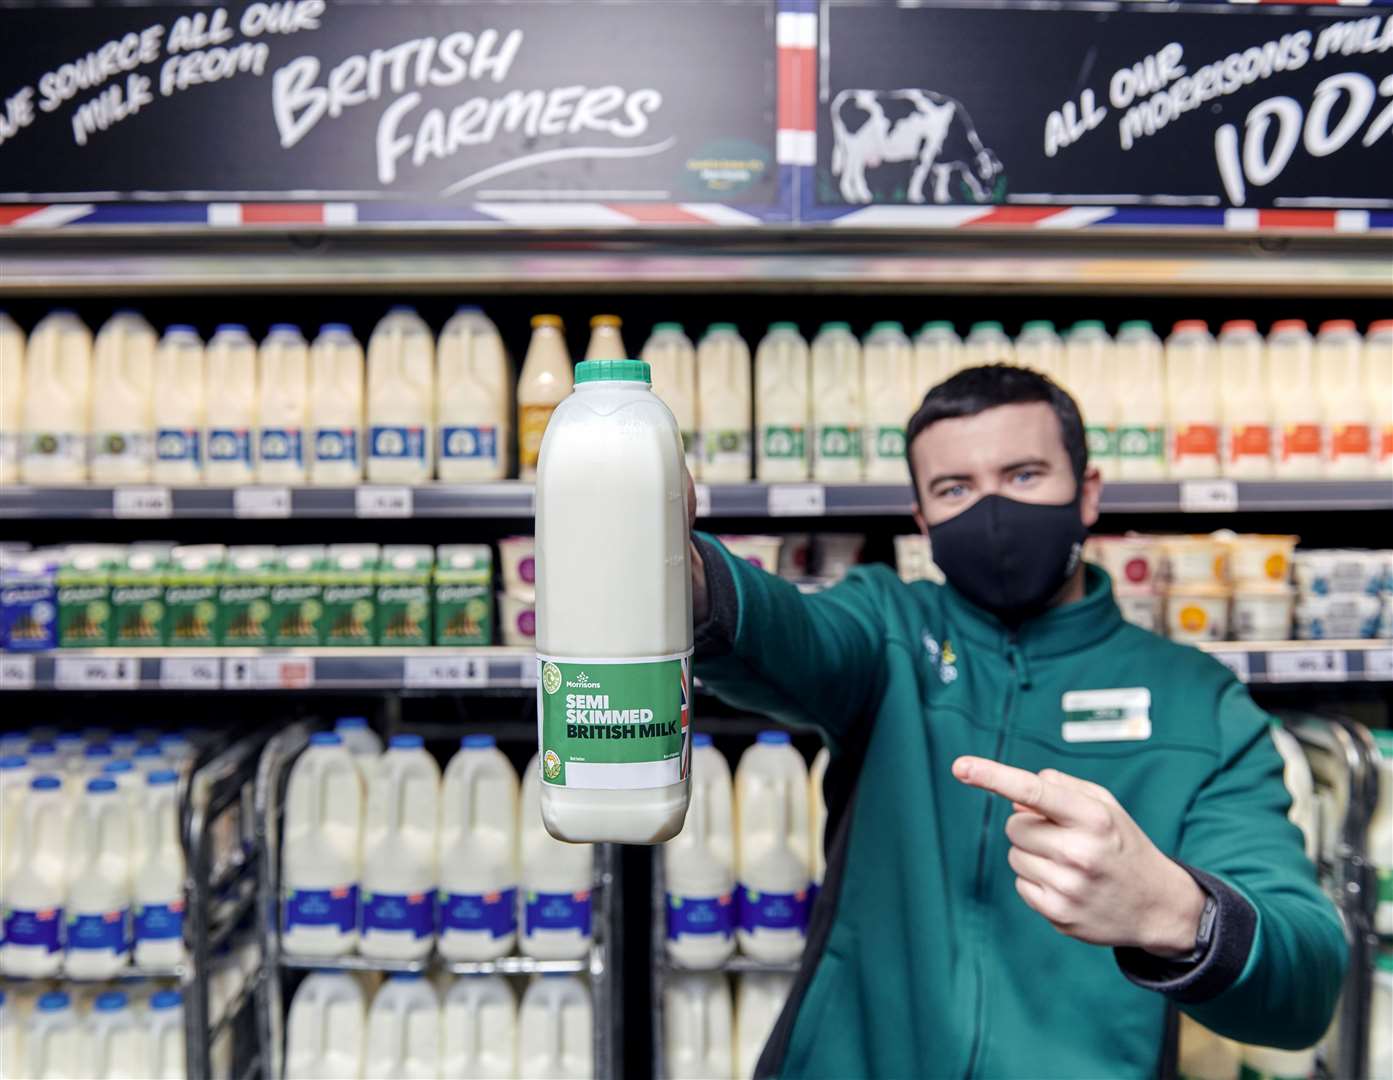 Morrisons has already scrapped use by dates on its milk